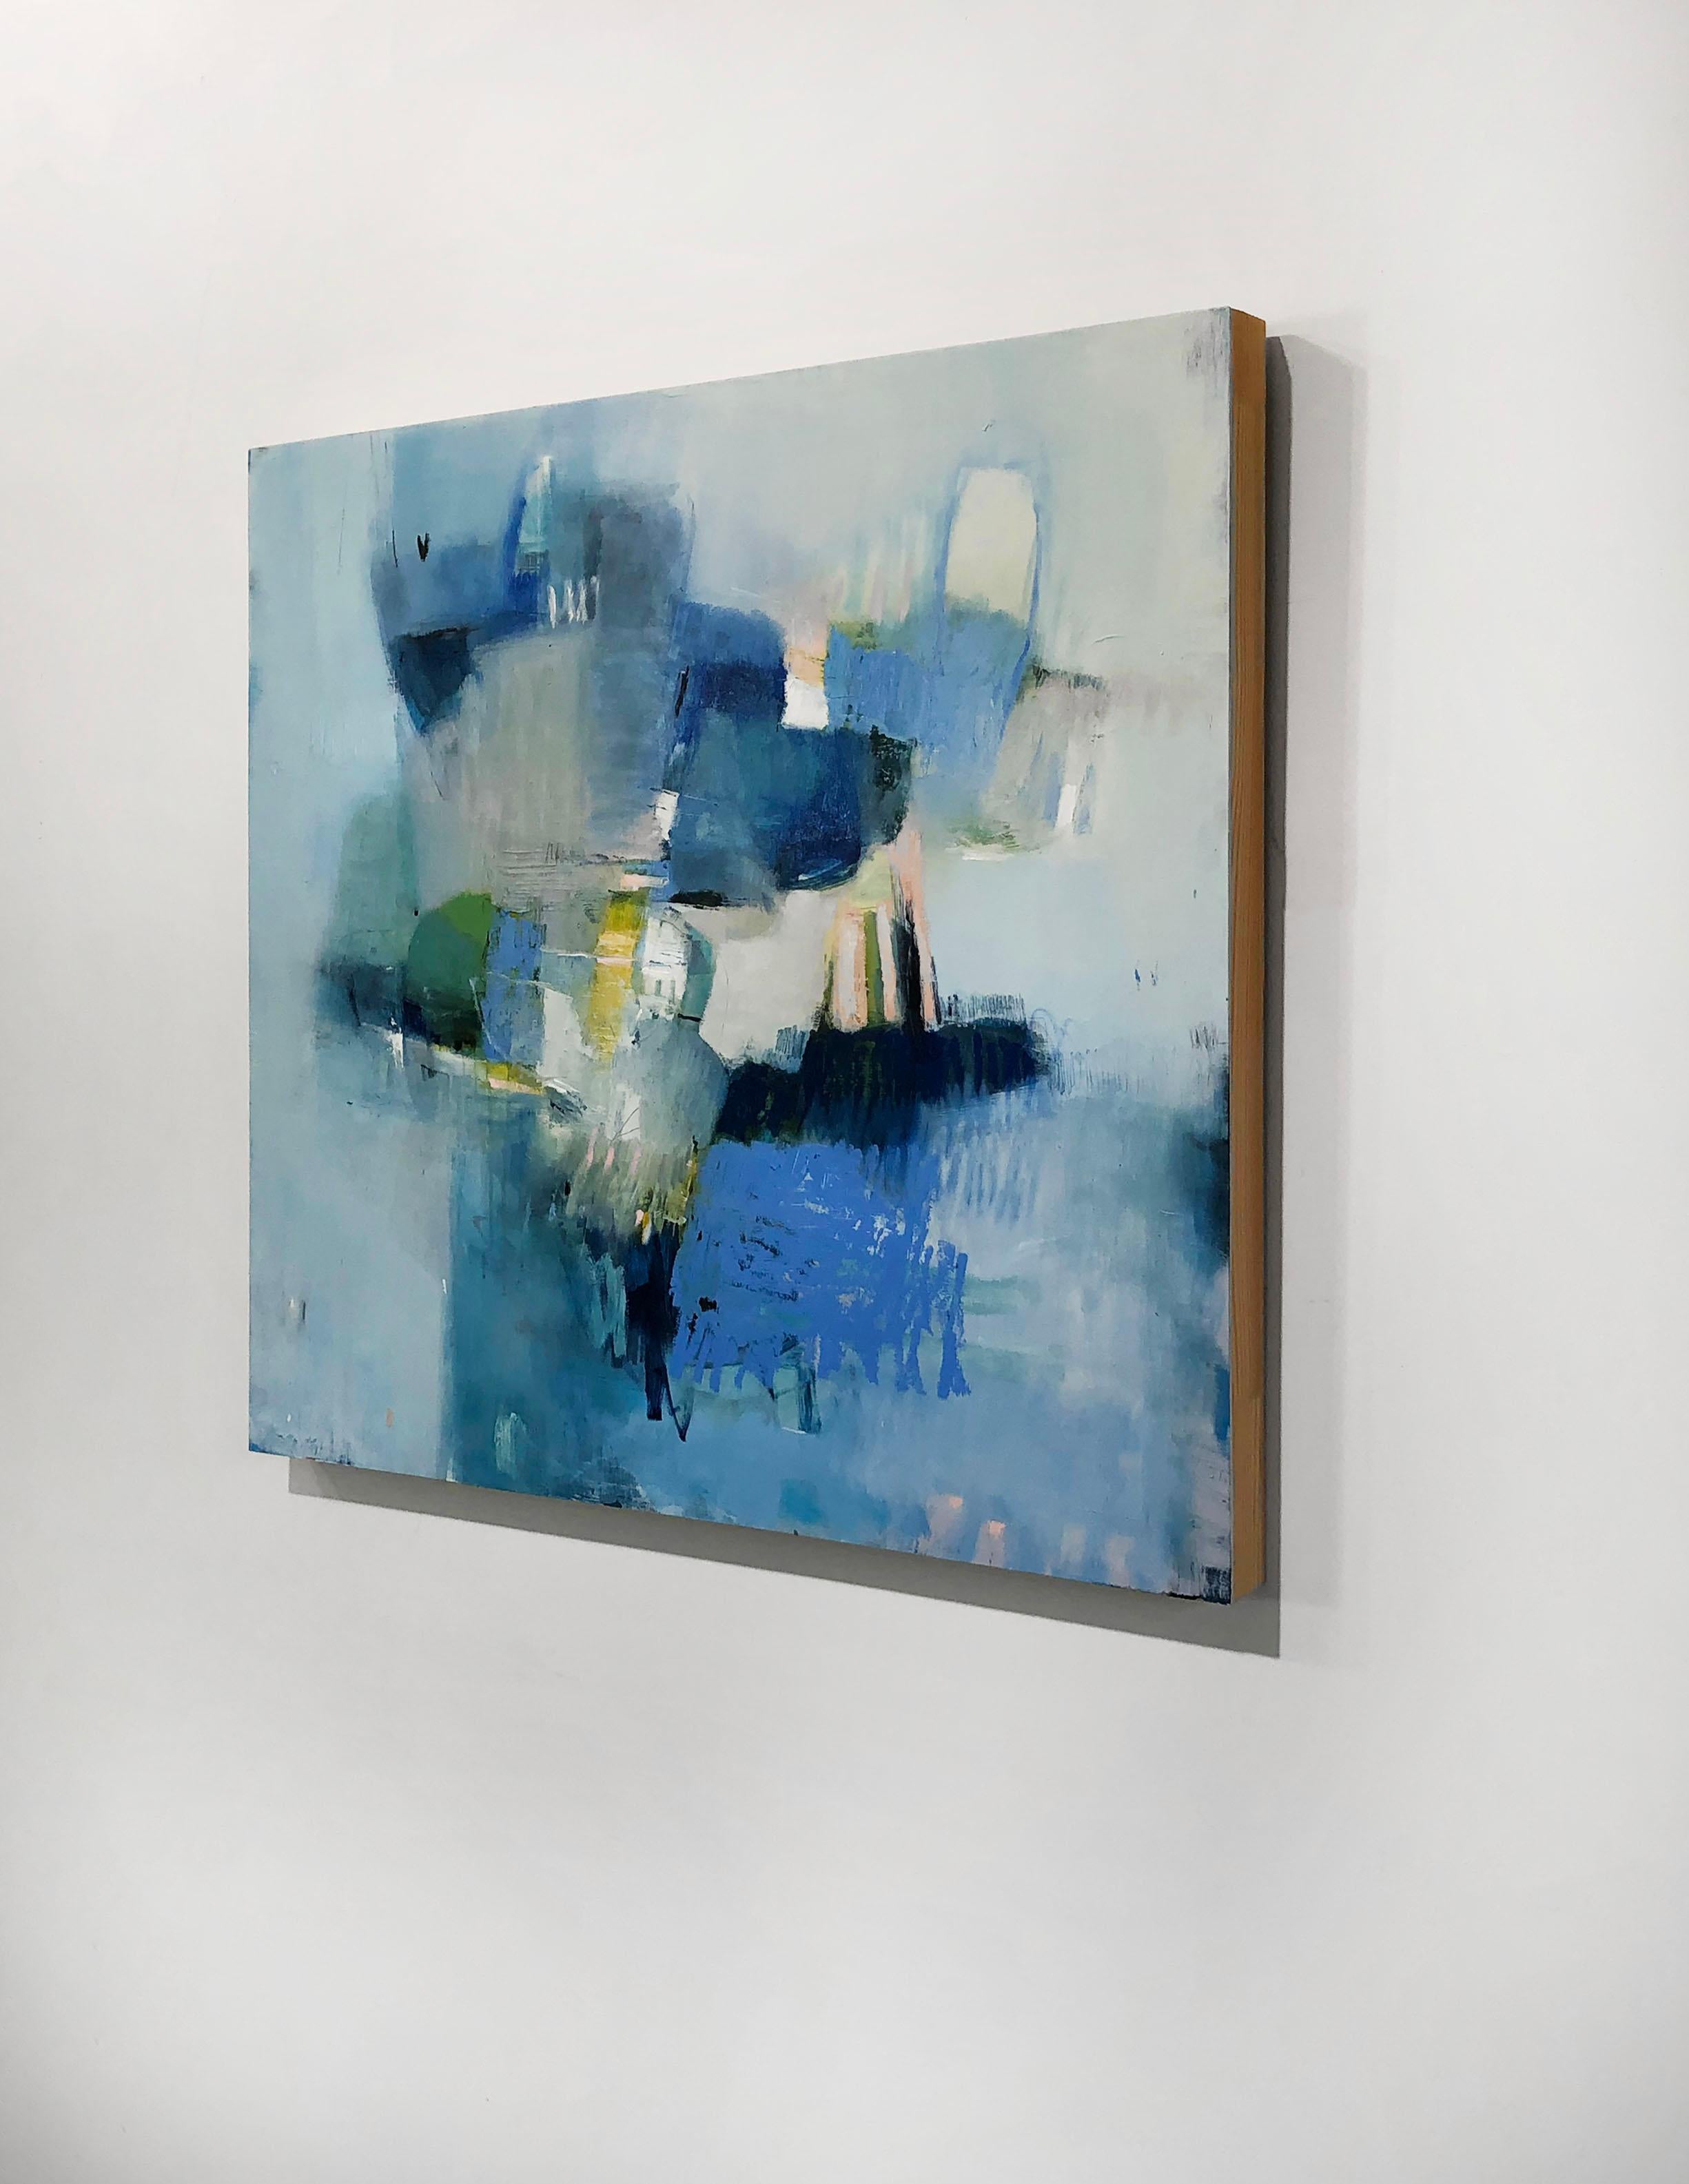 This abstract oil painting by Kelly Rossetti features a central cluster of blocks of cool colors, with pink, yellow, and green abstracts throughout. Lighter colors of paint are layered around the border of the canvas, giving the central assembly of